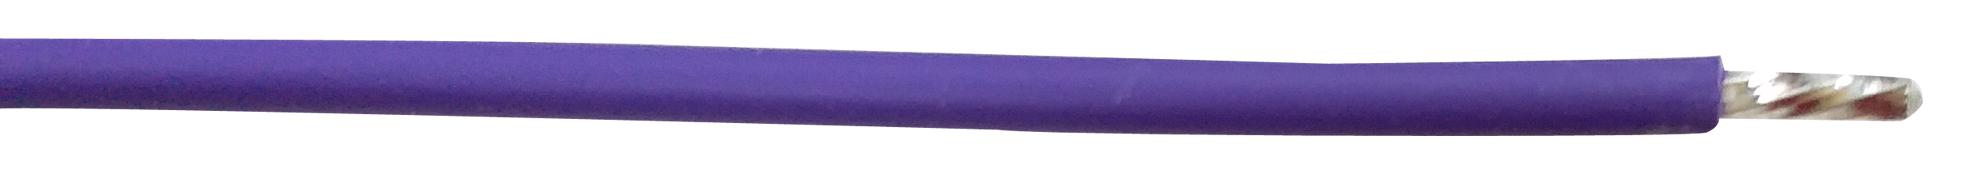 PP002390 HOOK-UP WIRE, 22AWG, PURPLE, 305M, 300V PRO POWER